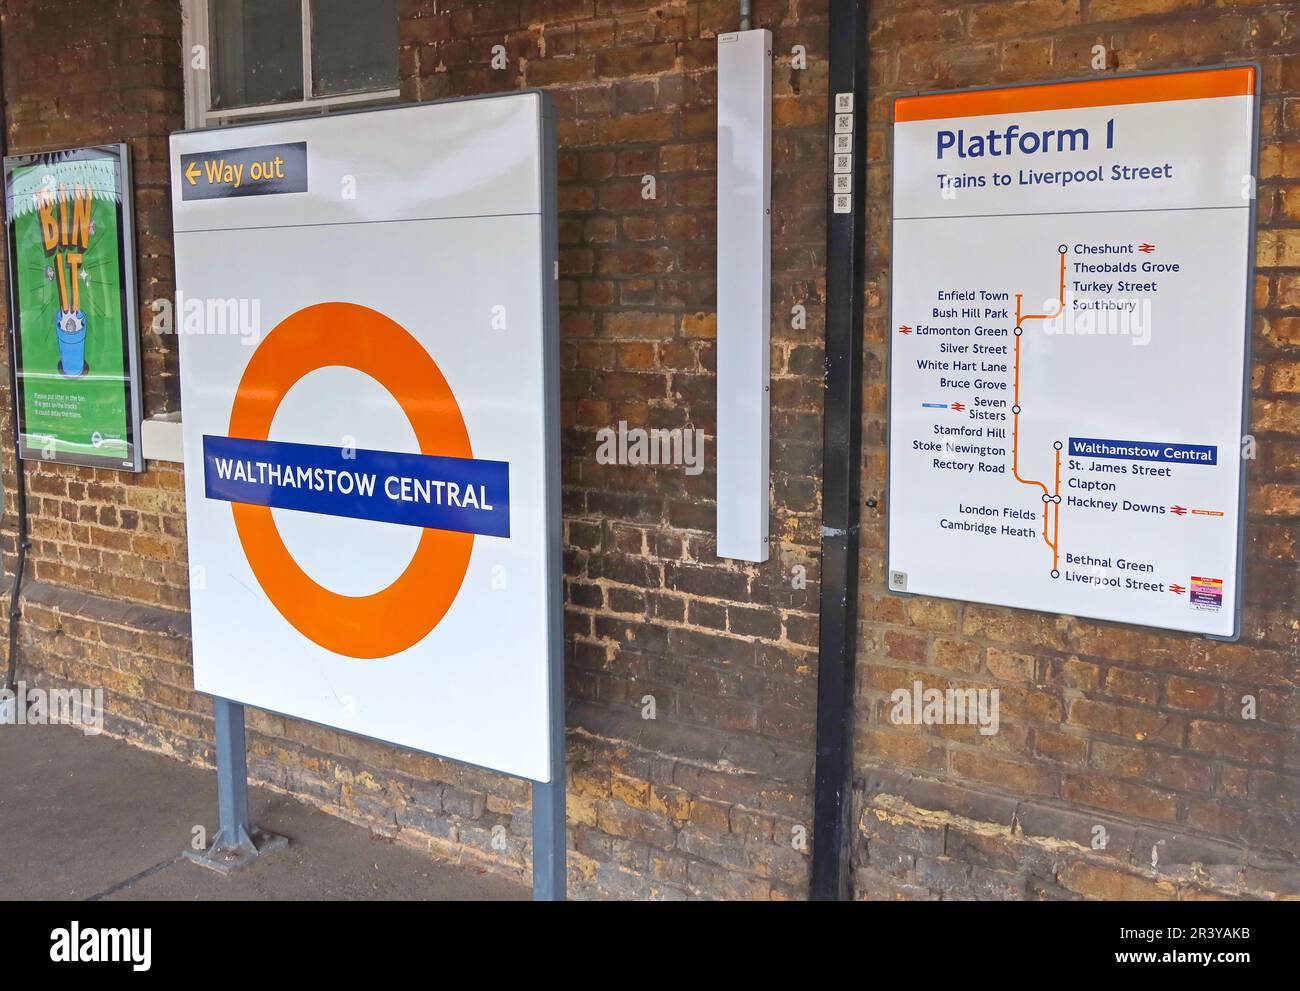 Walthamstow Central Overground Station, Platform One, BR, Hoe St, Walthamstow, Londres, Angleterre, Royaume-Uni, E17 7LP Banque D'Images